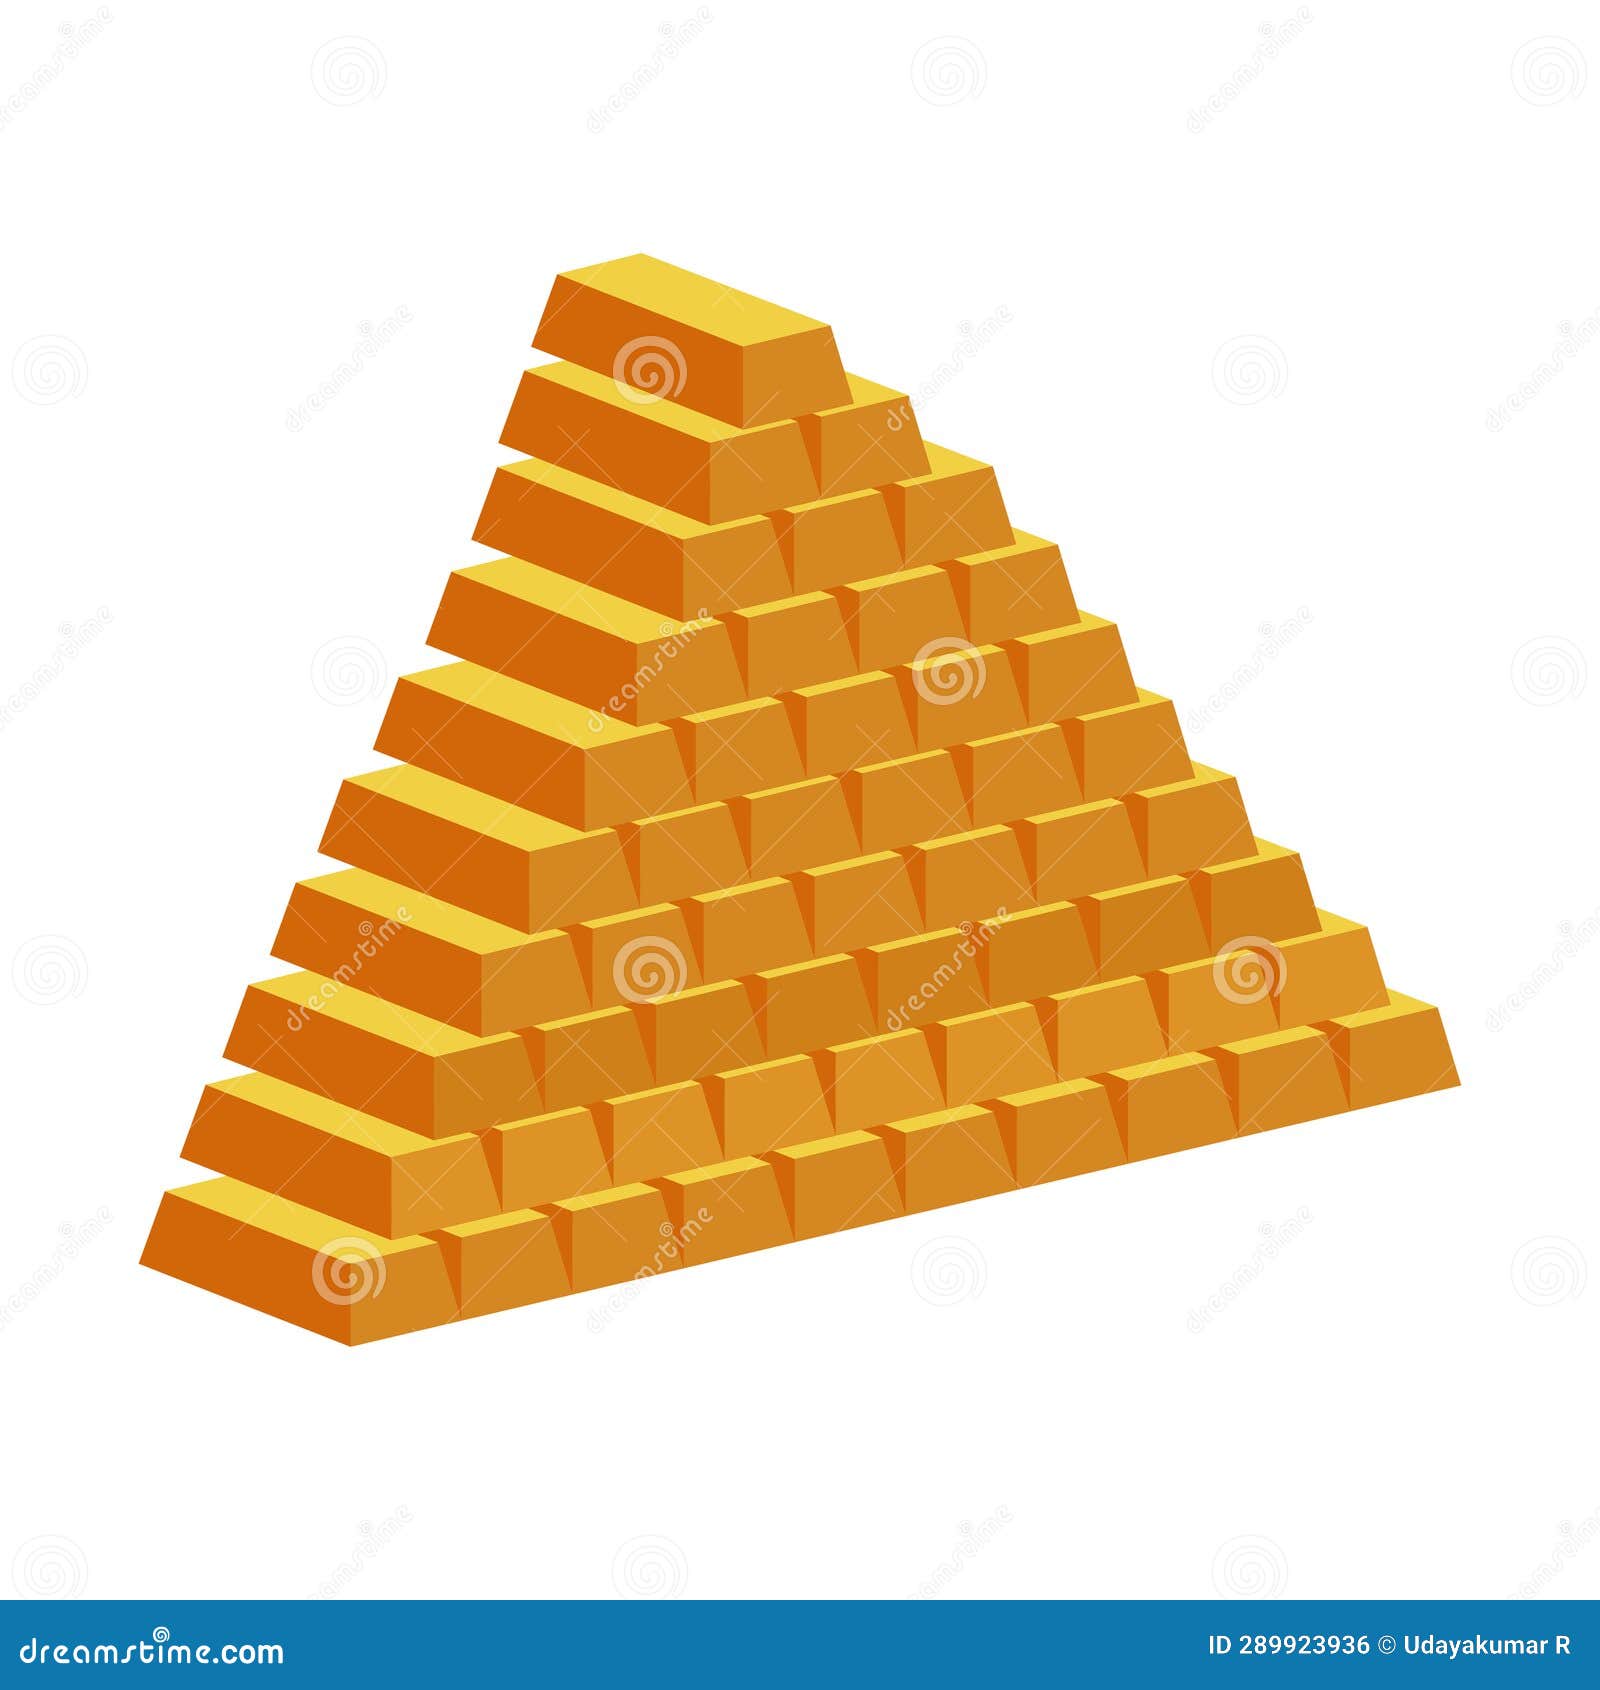 Gold Bar Stacked Pyramid Vector Illustration. Clipart Style Stock ...